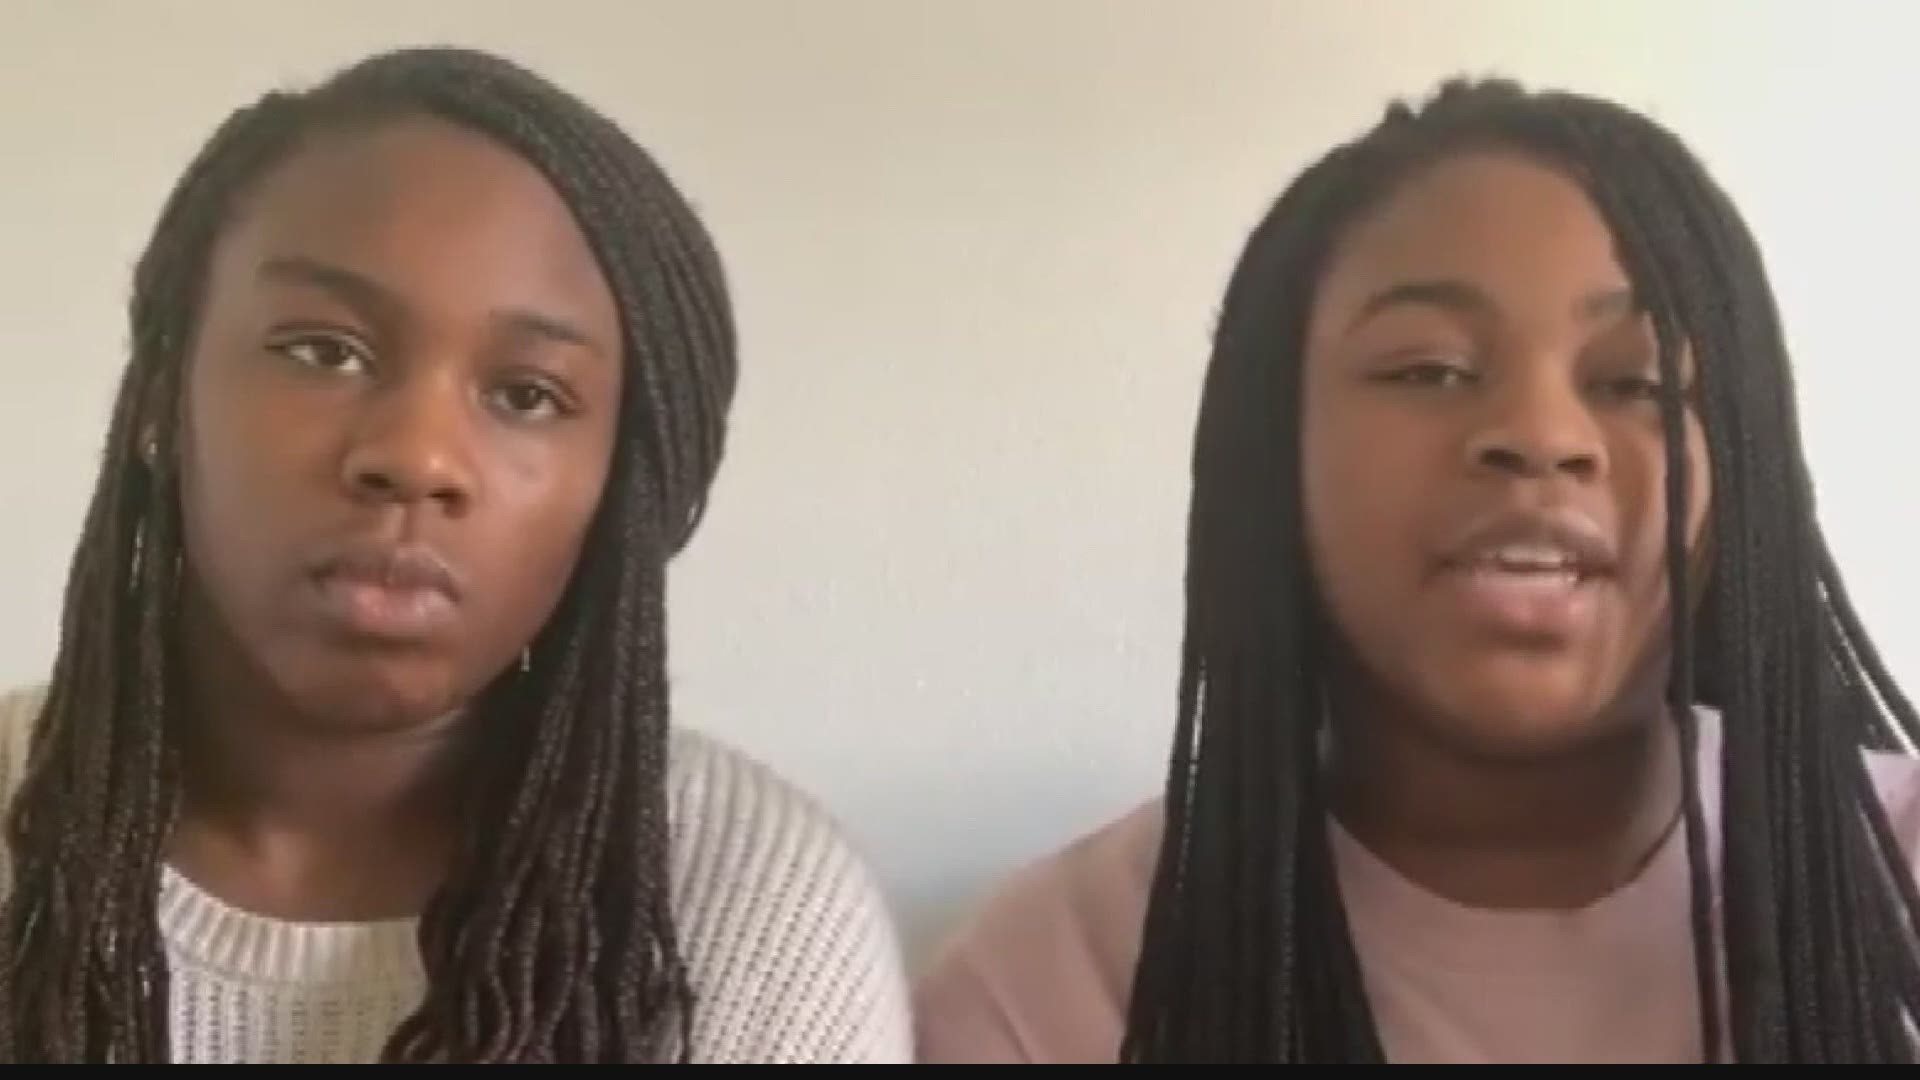 Parents are taking action in Brownsburg after two sisters shared their experience with racism in school.